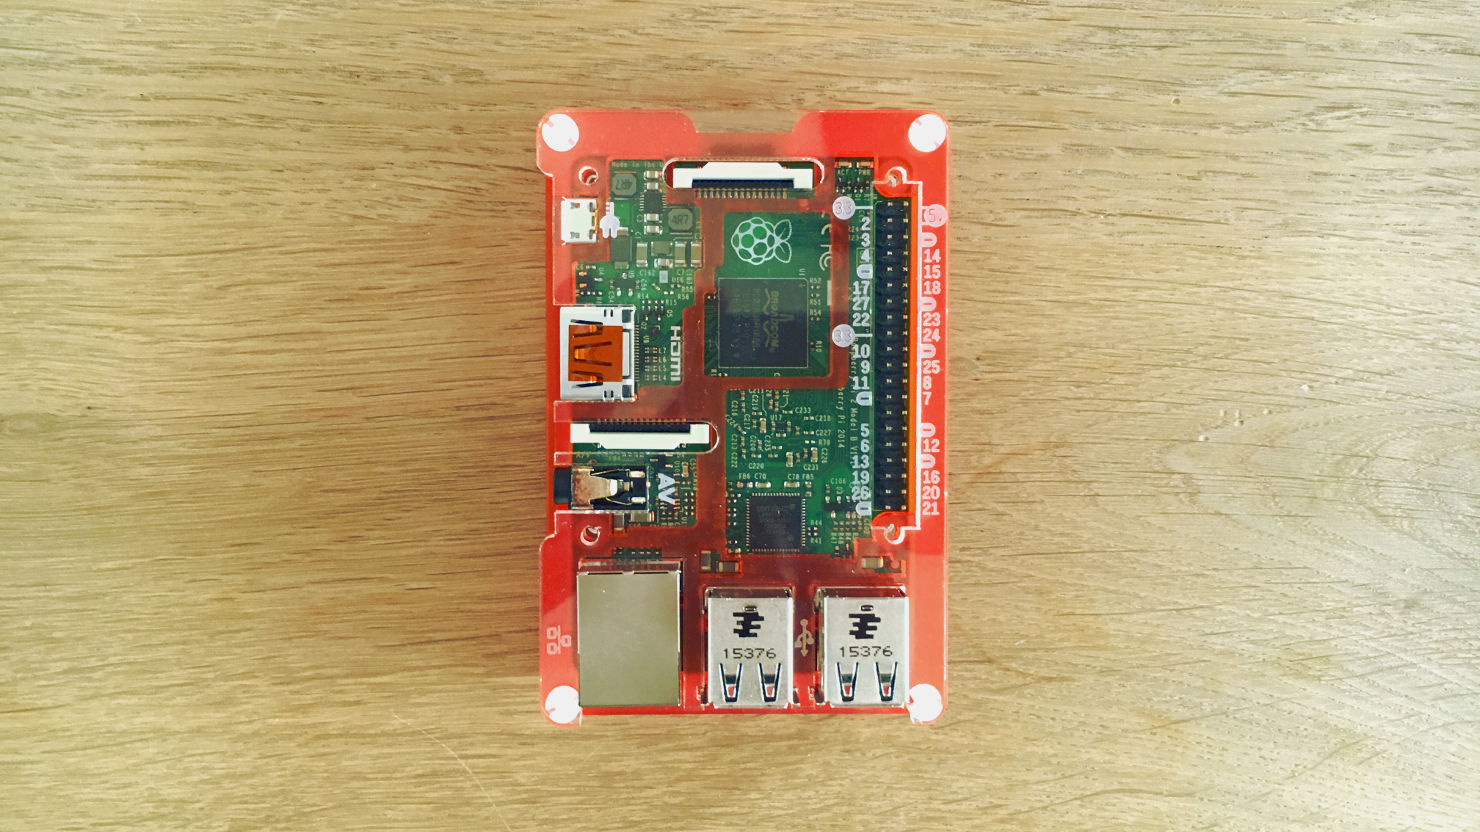 My Raspberry Pi 2 with a lovely tangerine Pibow case